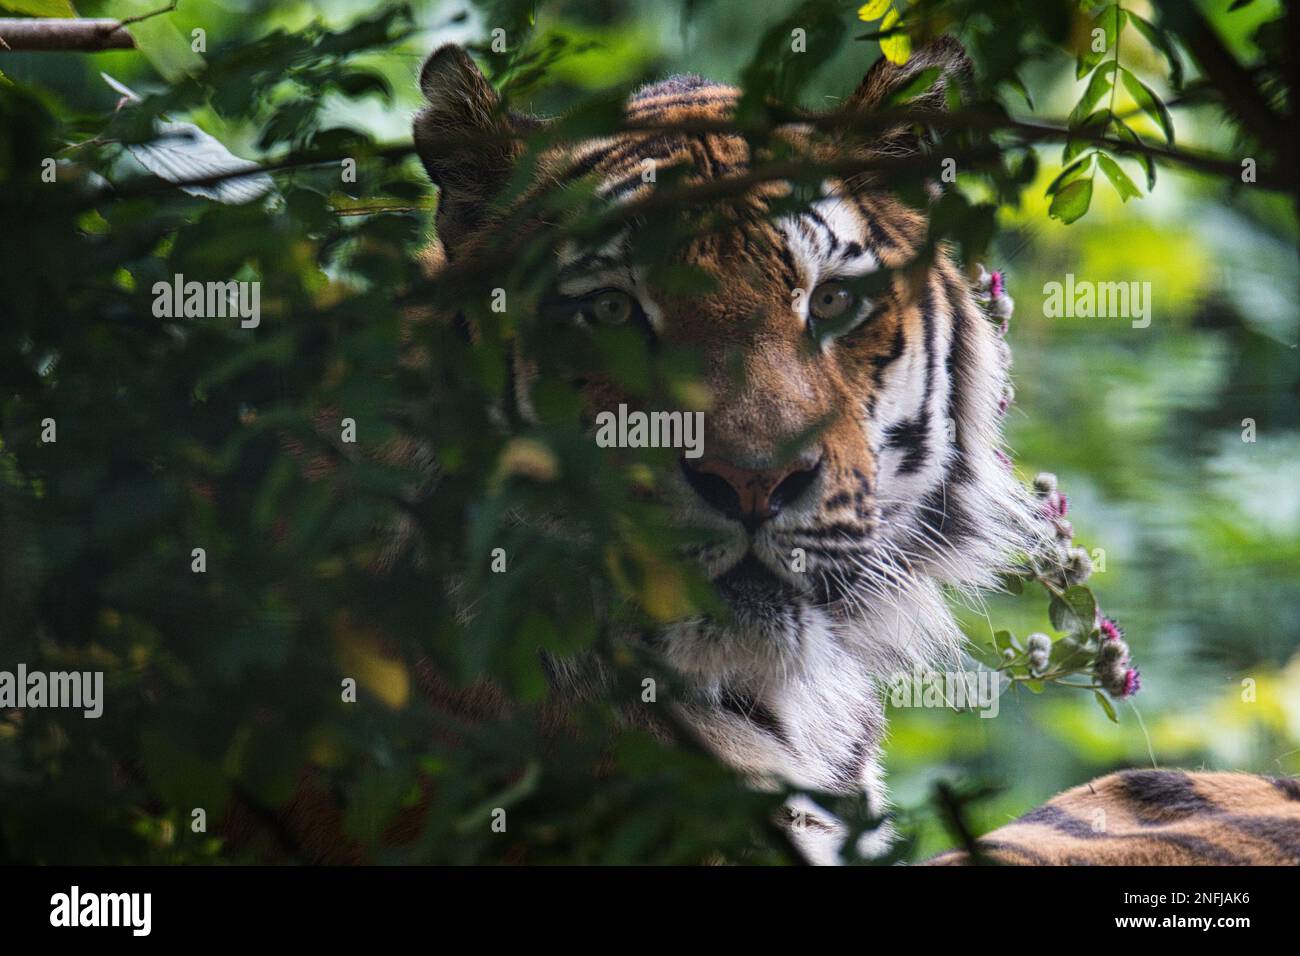 A scenic shot of a Bengal tiger lying on the ground and looking through the green plants Stock Photo